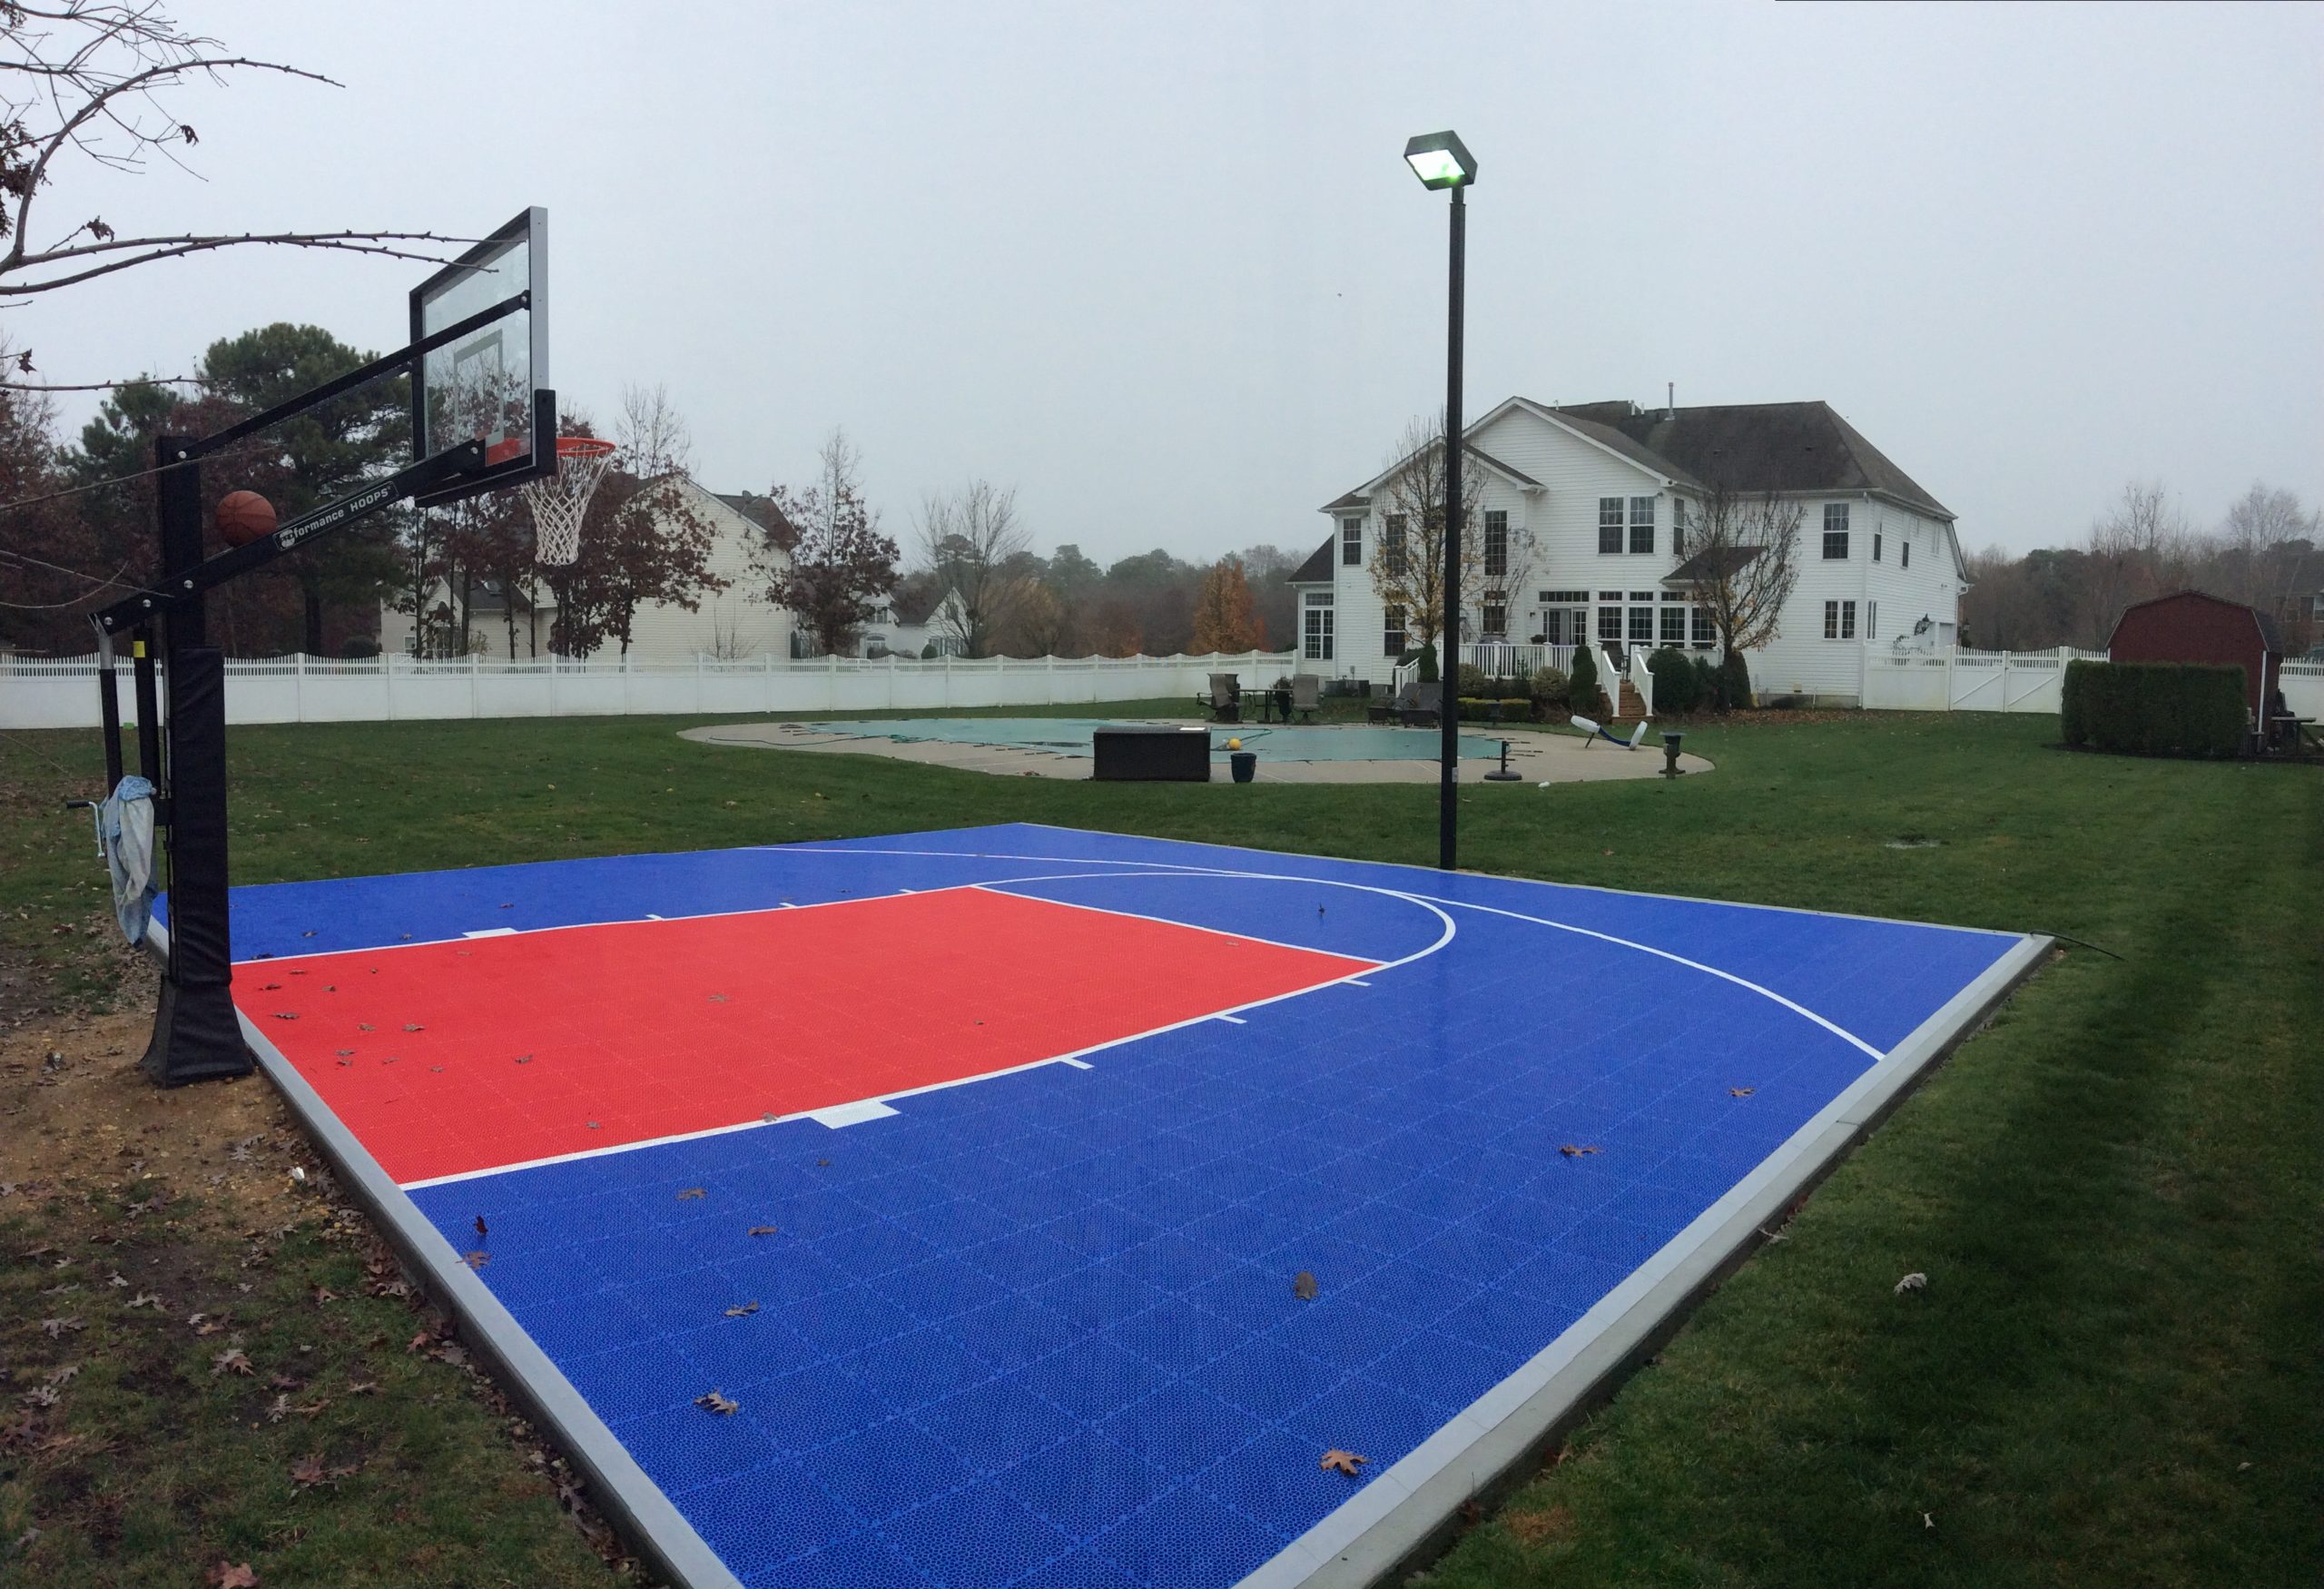 30′ x 30′ SnapSports DuraCourt Basketball Court Surface -Have a smaller space but still want the excitement of your own basketball court in your backyard, the SnapSports 30′ x 30′ is our most popular smaller court size.  This court features our DuraCourt outdoor surface with half court basketball lines.  Simply shooting around, a game of horse or pick up games with the kids, this basketball surface will provide a safe and attractive place to play.  With 19 colors  from which to choose your team can make this court their own!